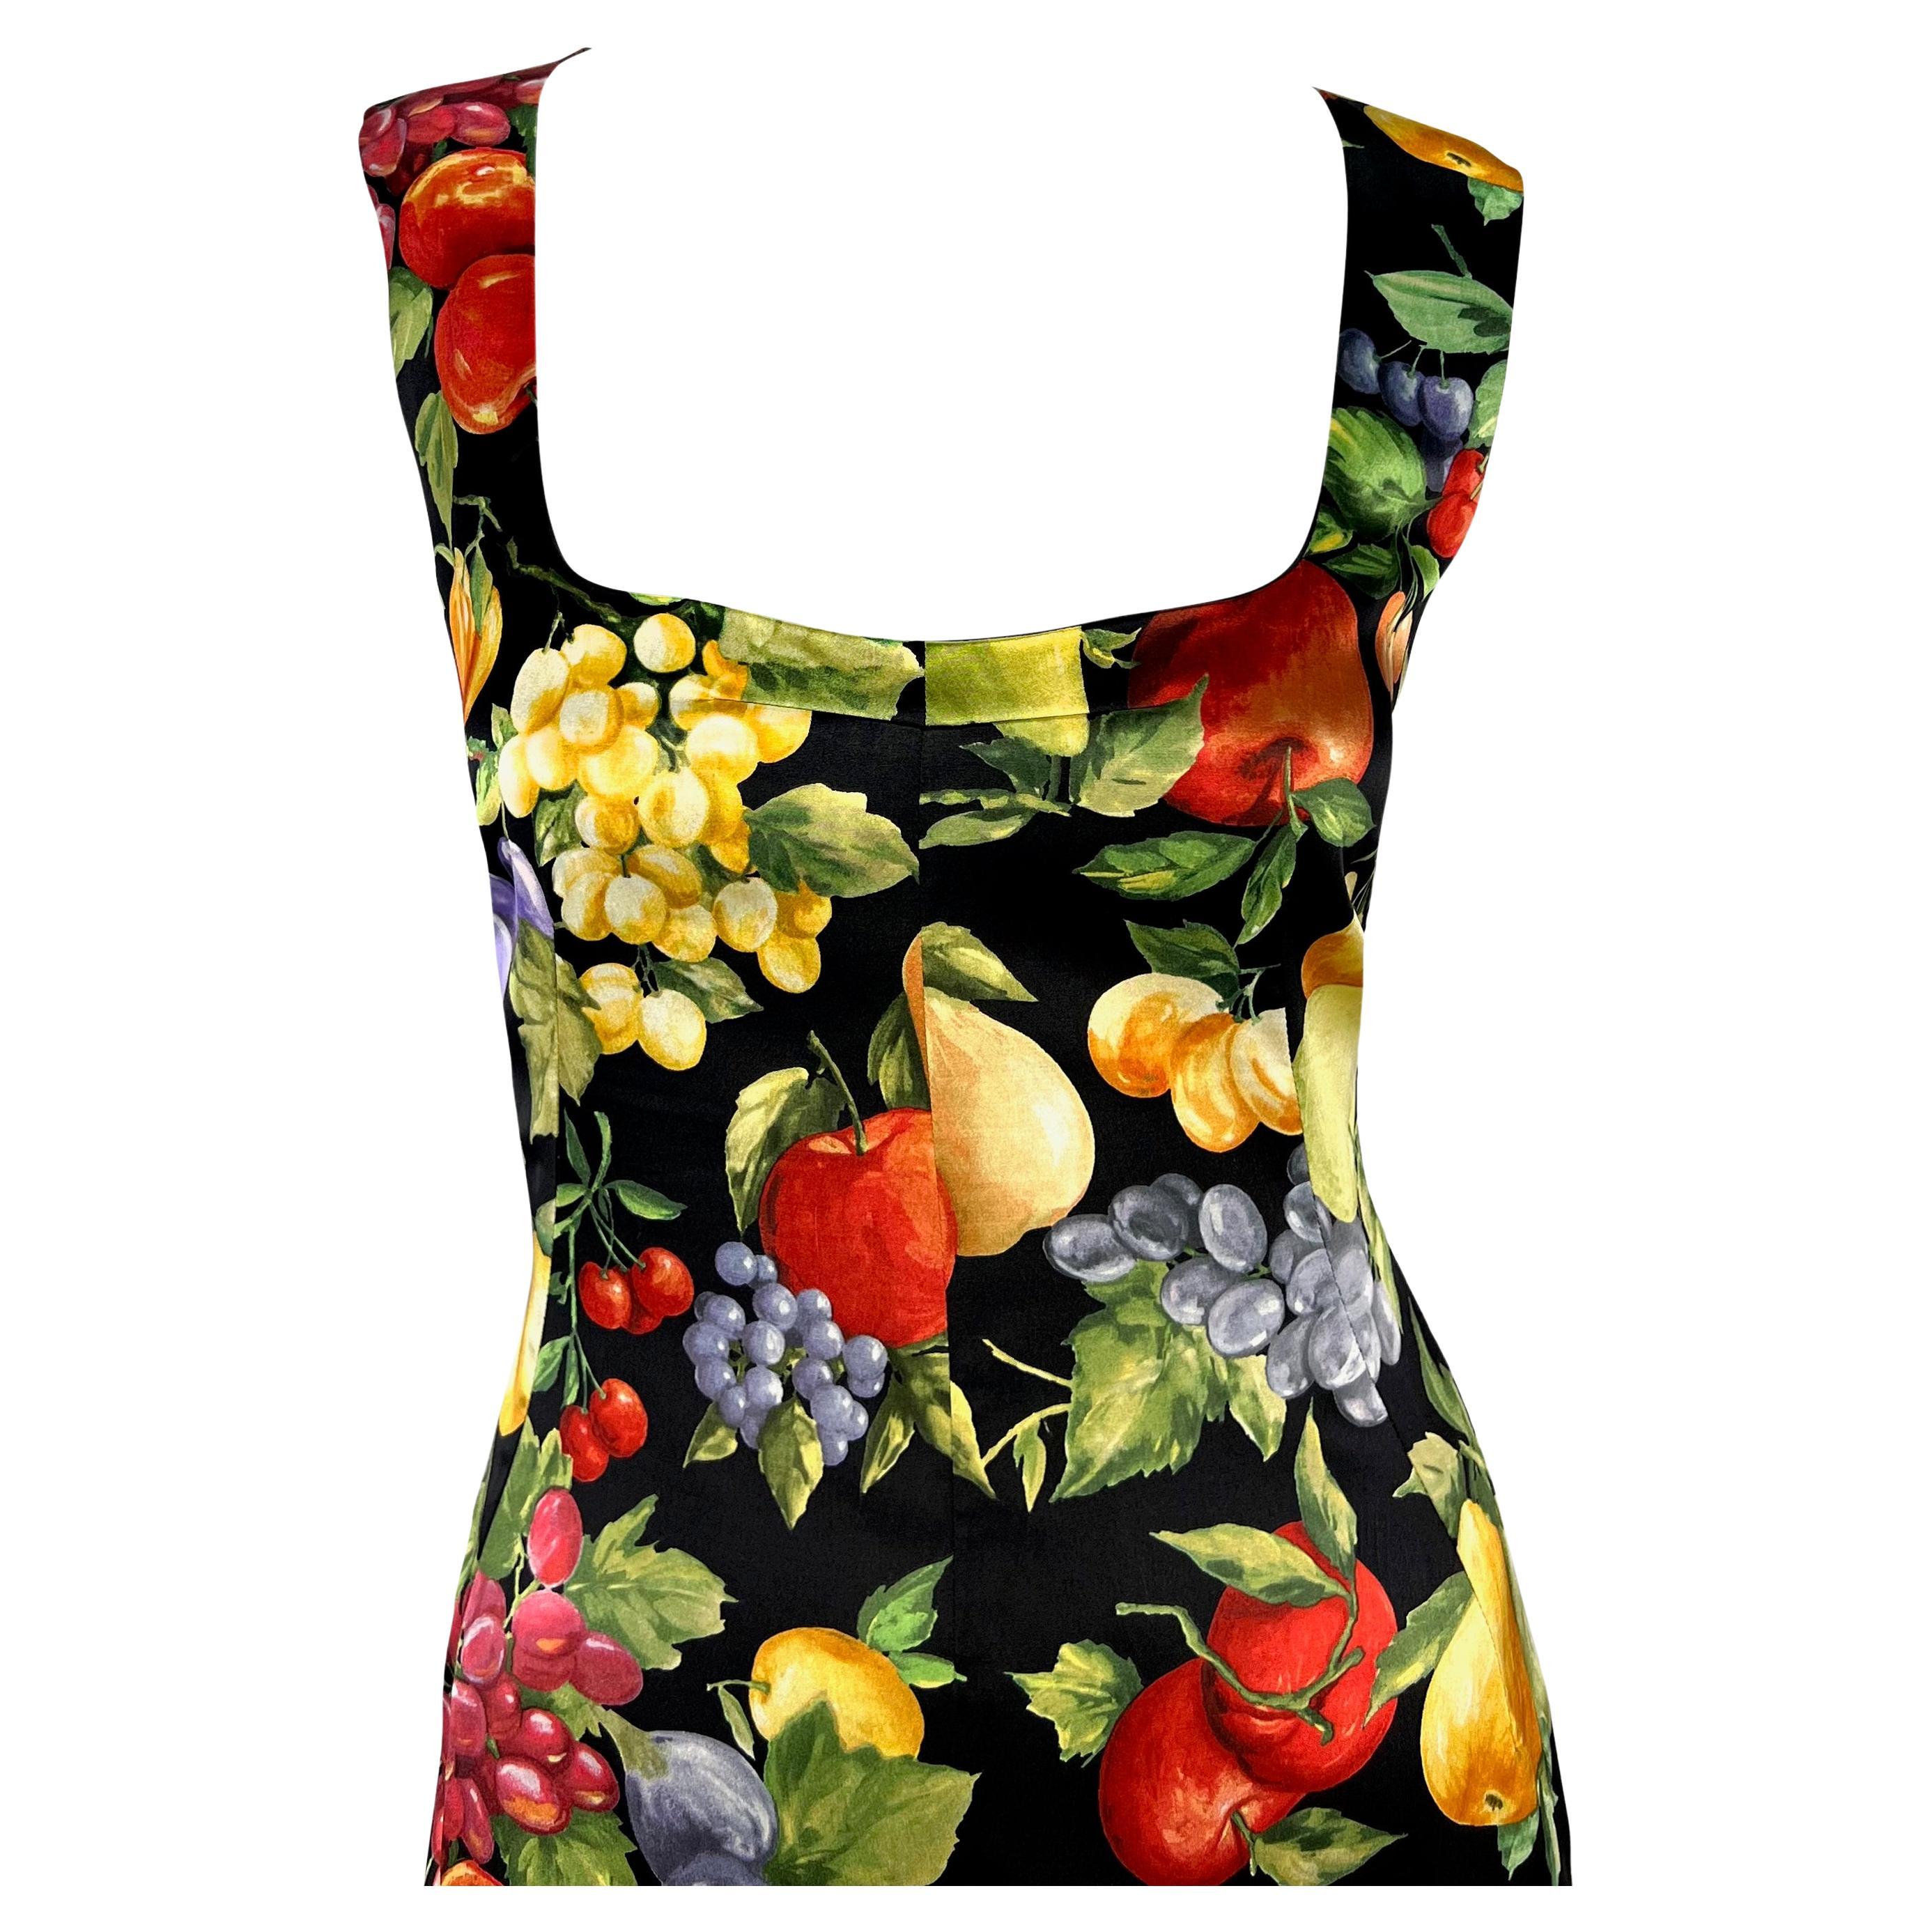 This knee-length Dolce & Gabbana dress, crafted from luxurious satin, bursts with vibrancy with its lively fruit-motif print. Designed with stretch fabric, it hugs the body with a form-fitting silhouette. The dress is distinguished by its low 